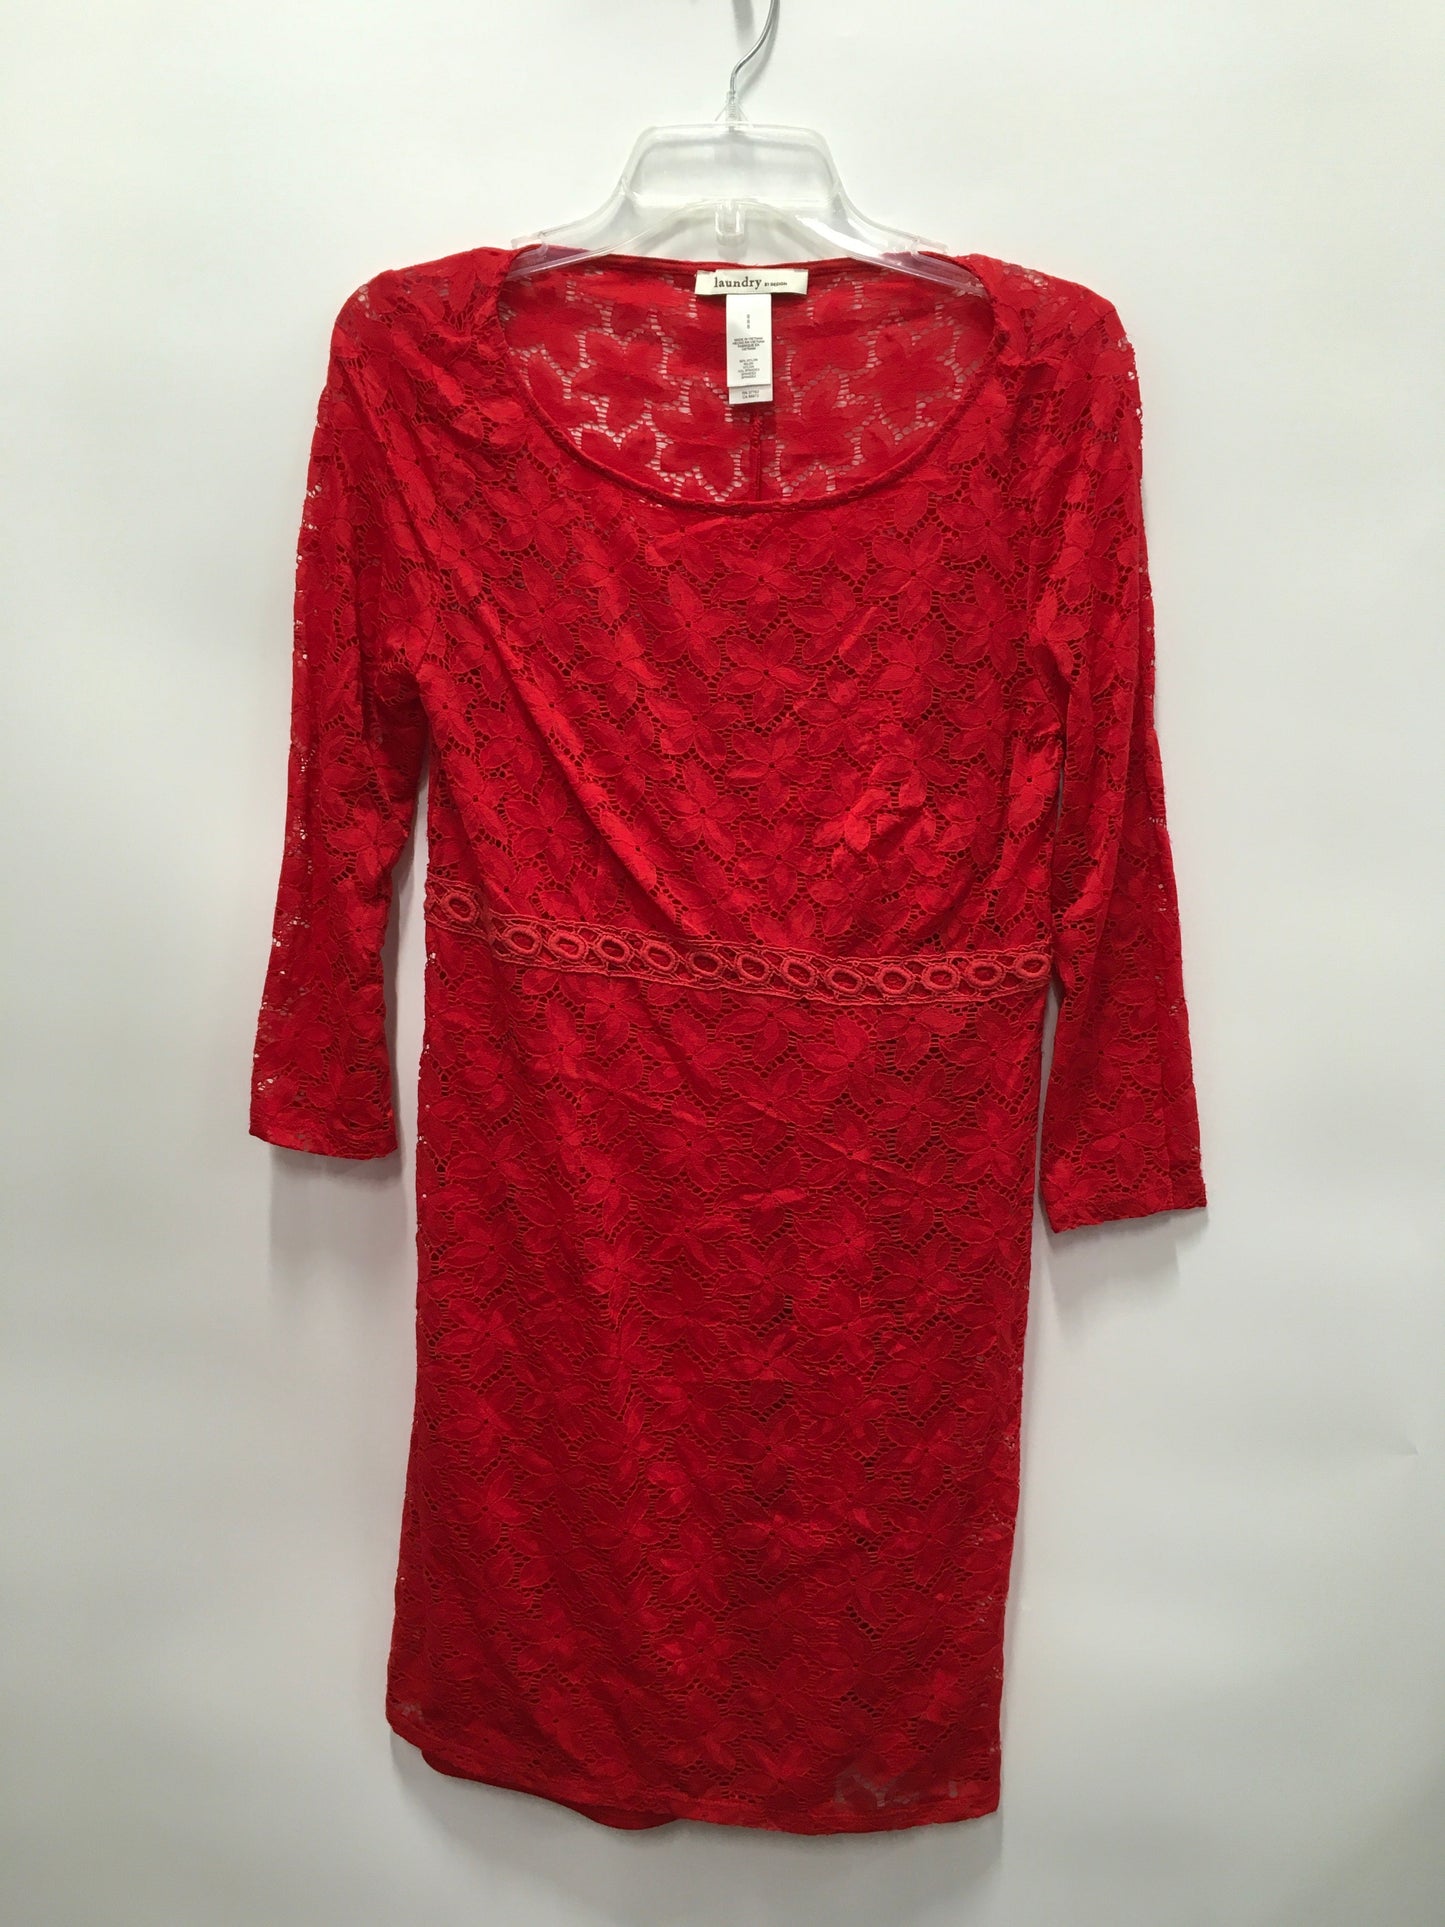 Red Dress Casual Short Laundry, Size 8